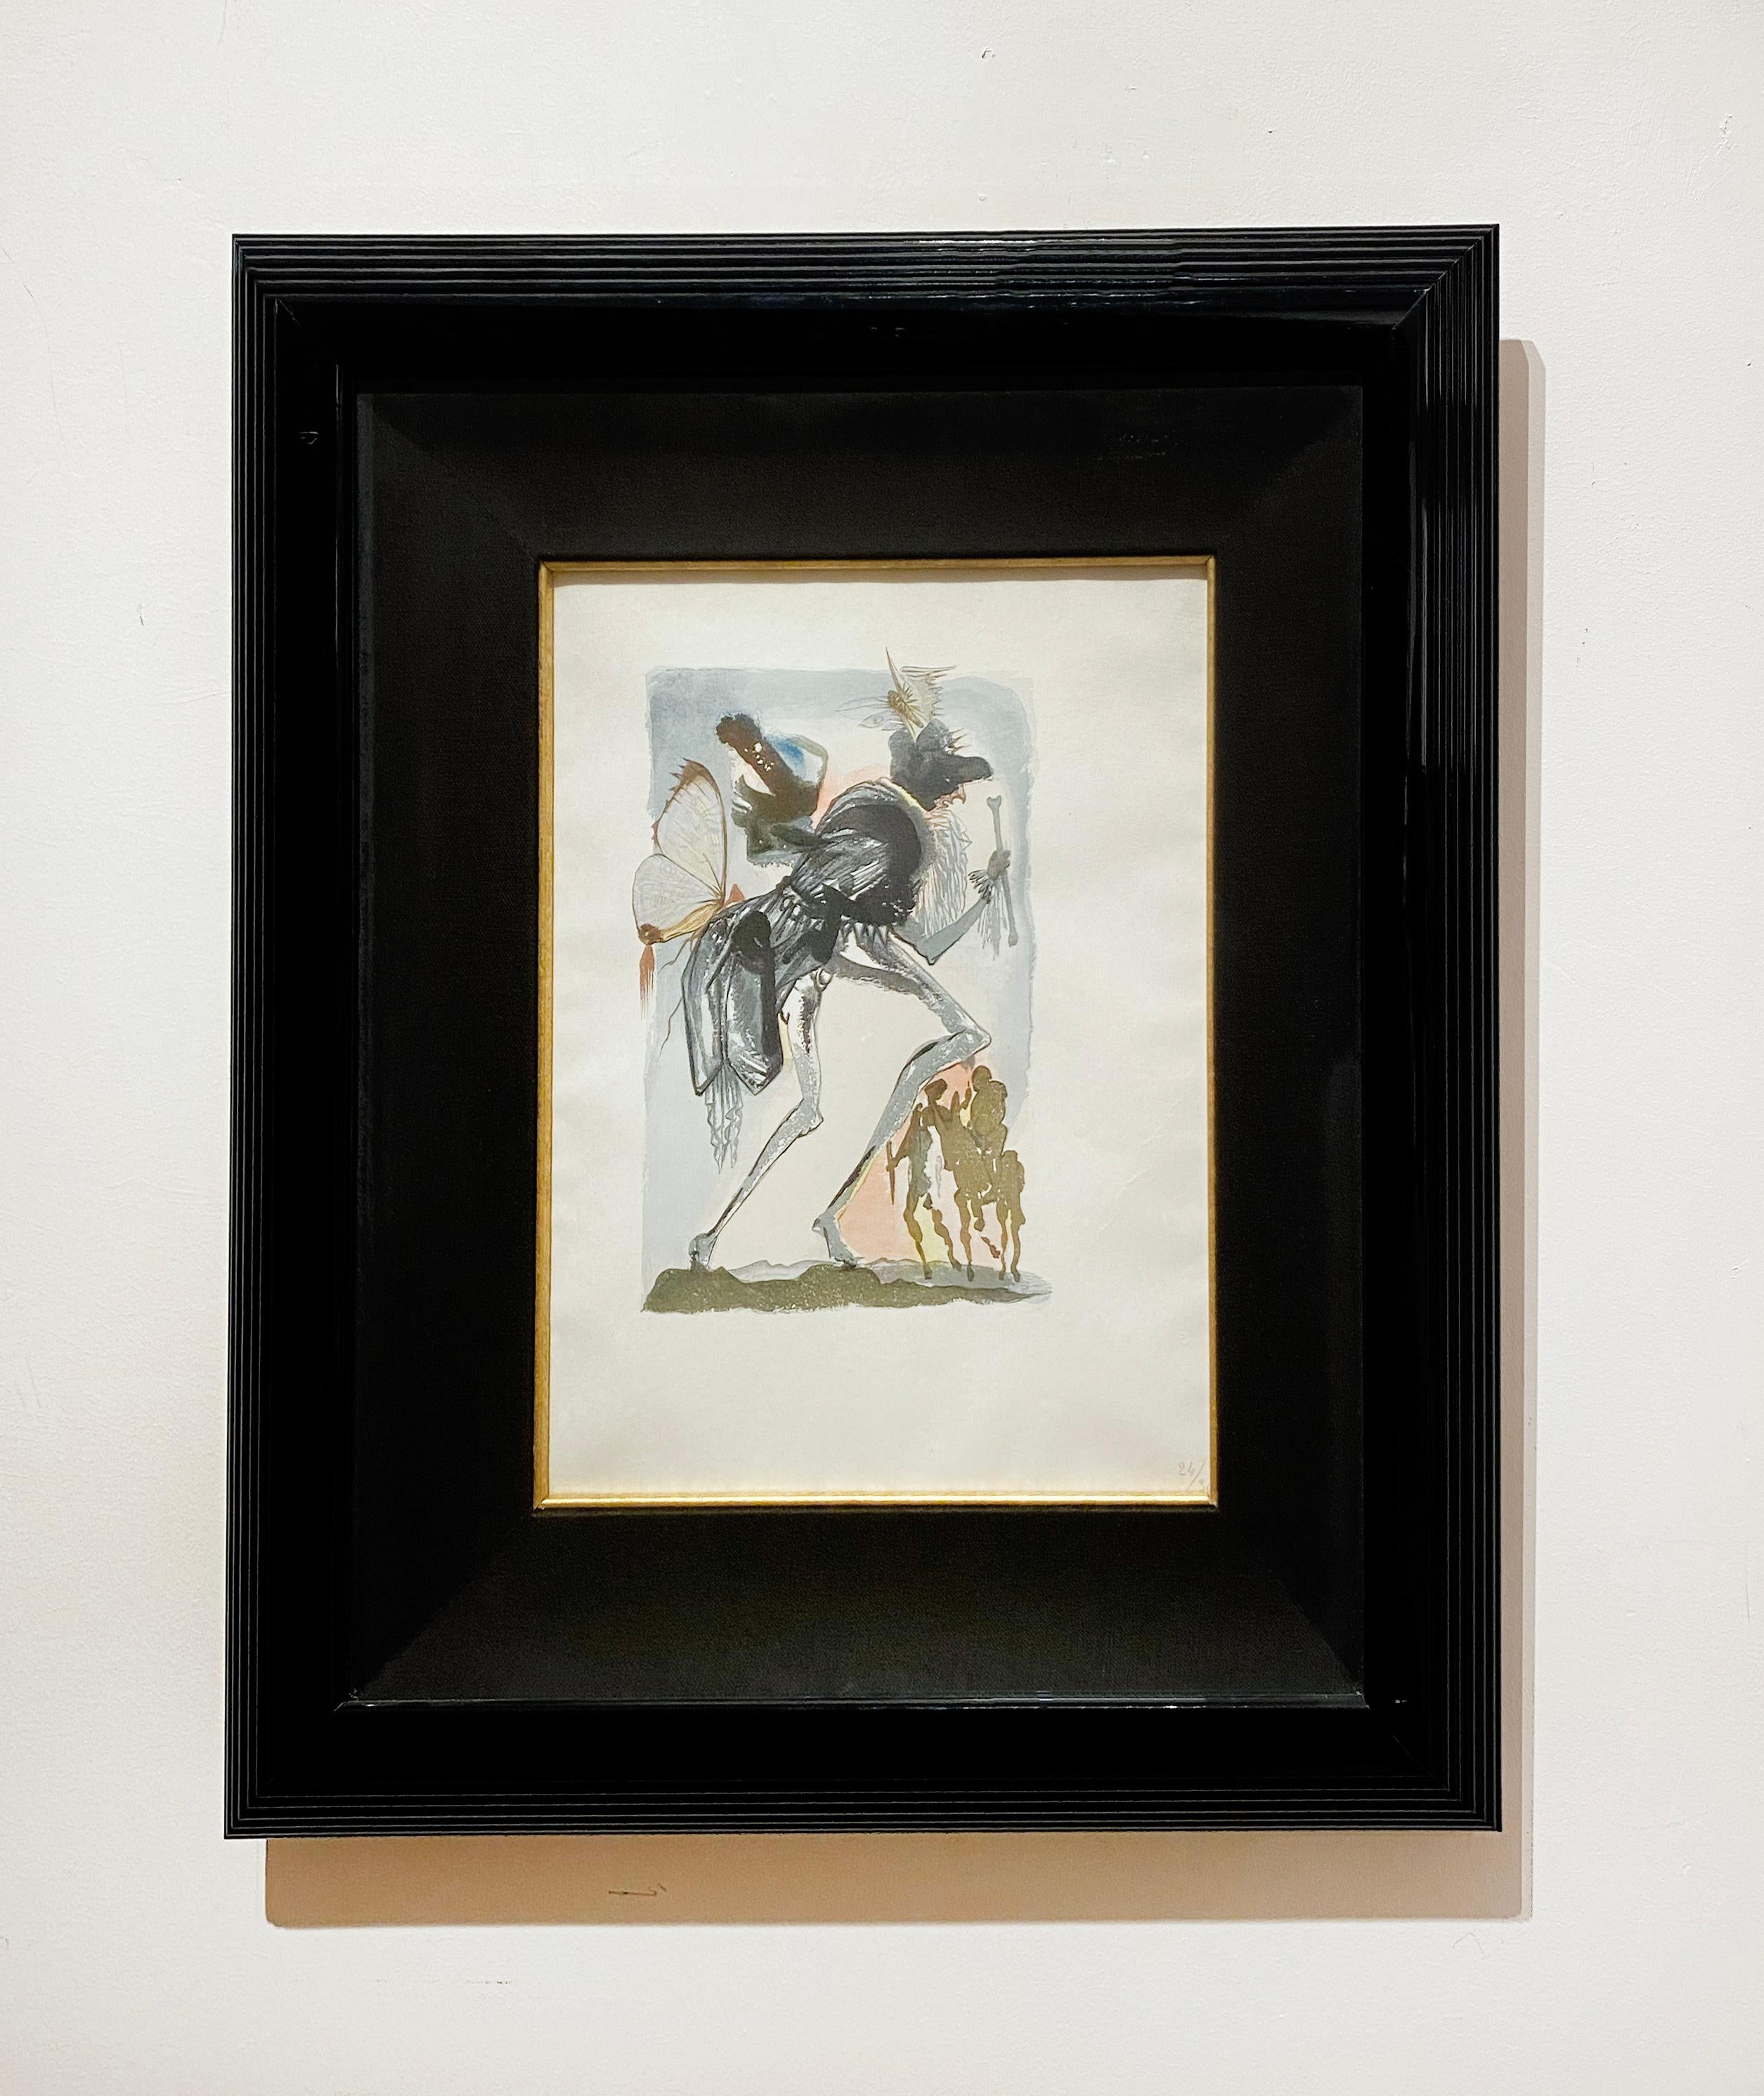 Artist:  Dali, Salvador
Title:  Untitled VII (Le Tricorne)
Series:  Le Tricorne (The Three-Pointed Hat)
Date:  1959
Medium:  Wood engraving 
Framed Dimensions:  20